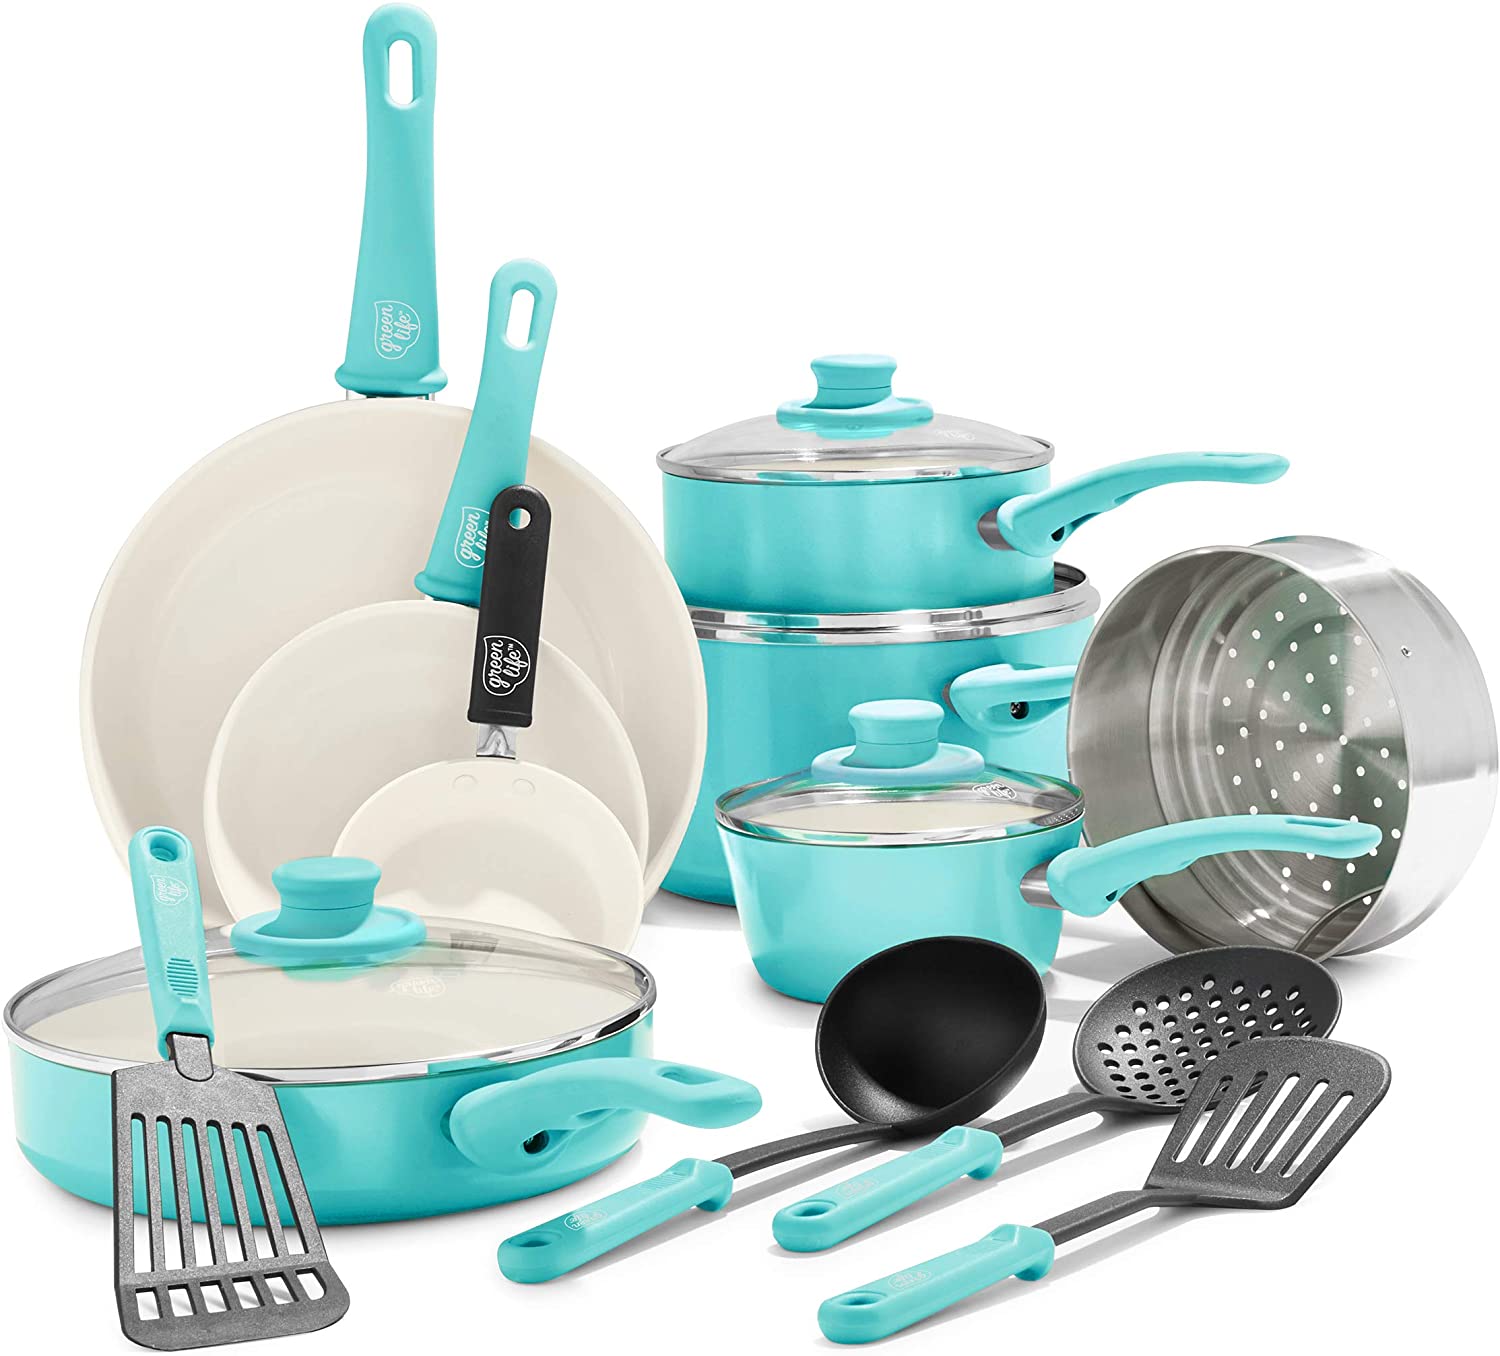 Greenlife Soft Grip Easy Clean Ceramic Cookware Set 16 Piece